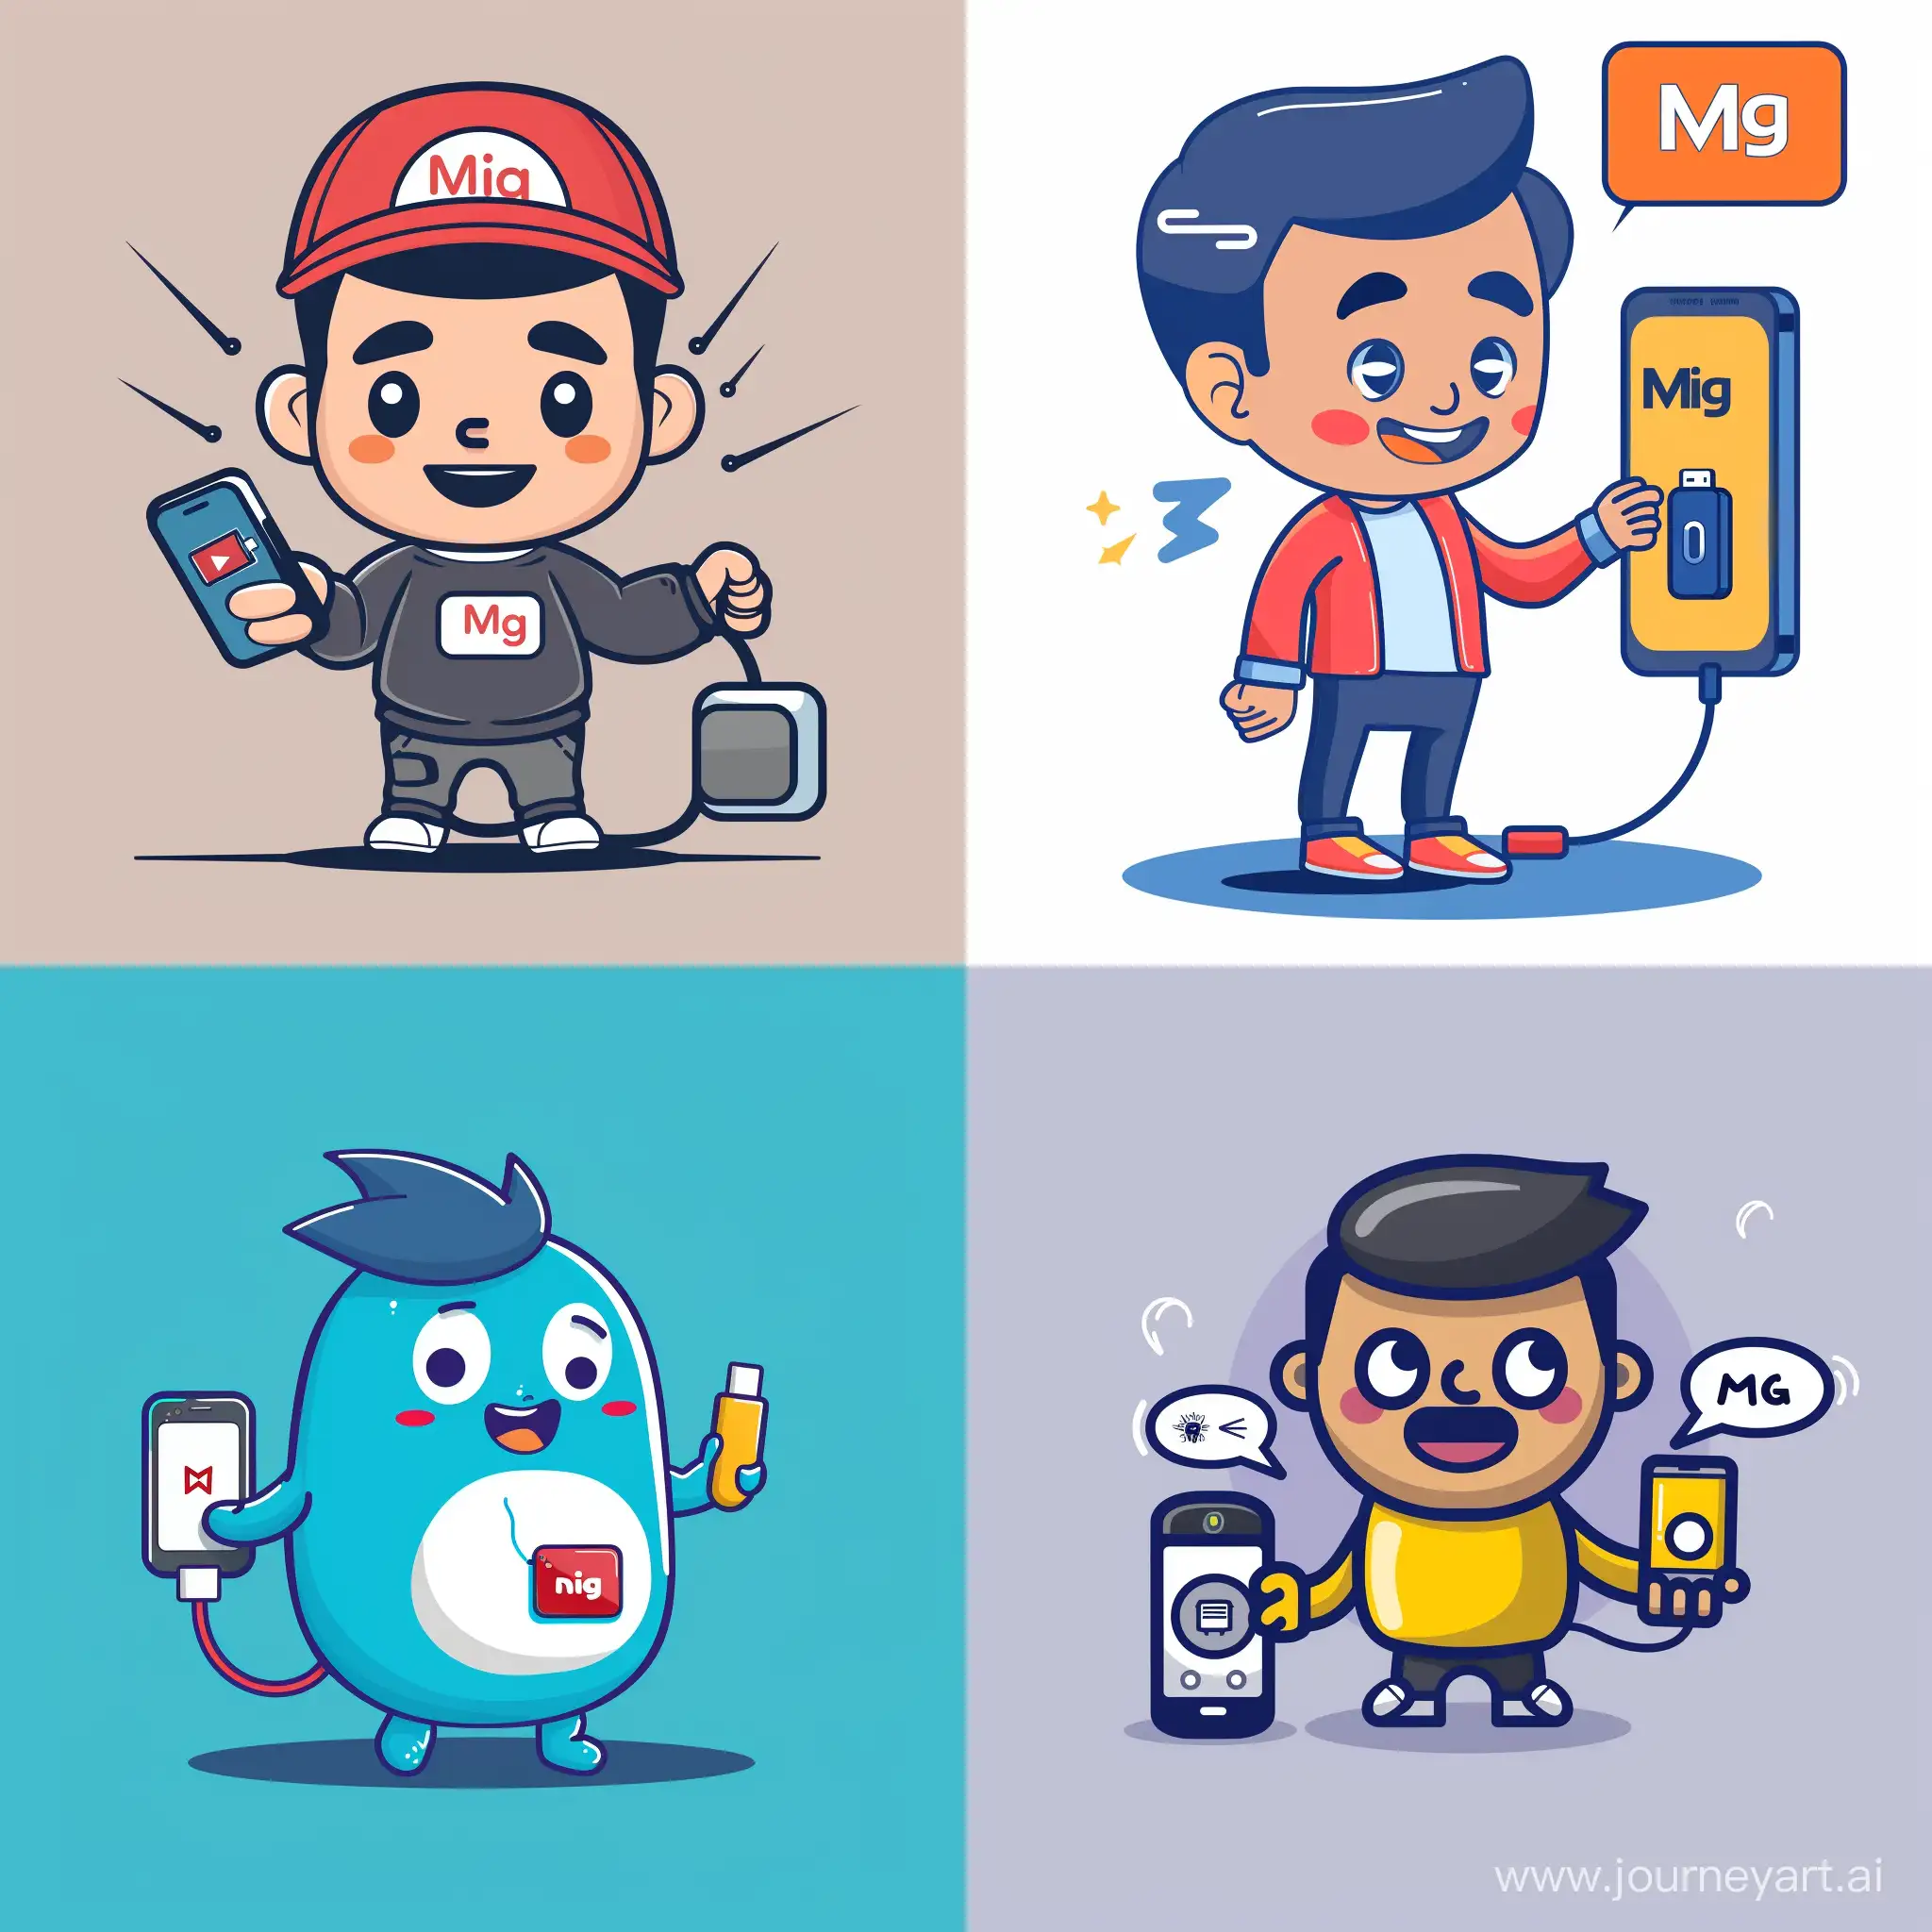 The vector character of Mig Mig, who is tapping his phone, shows fast charging and charging. 
